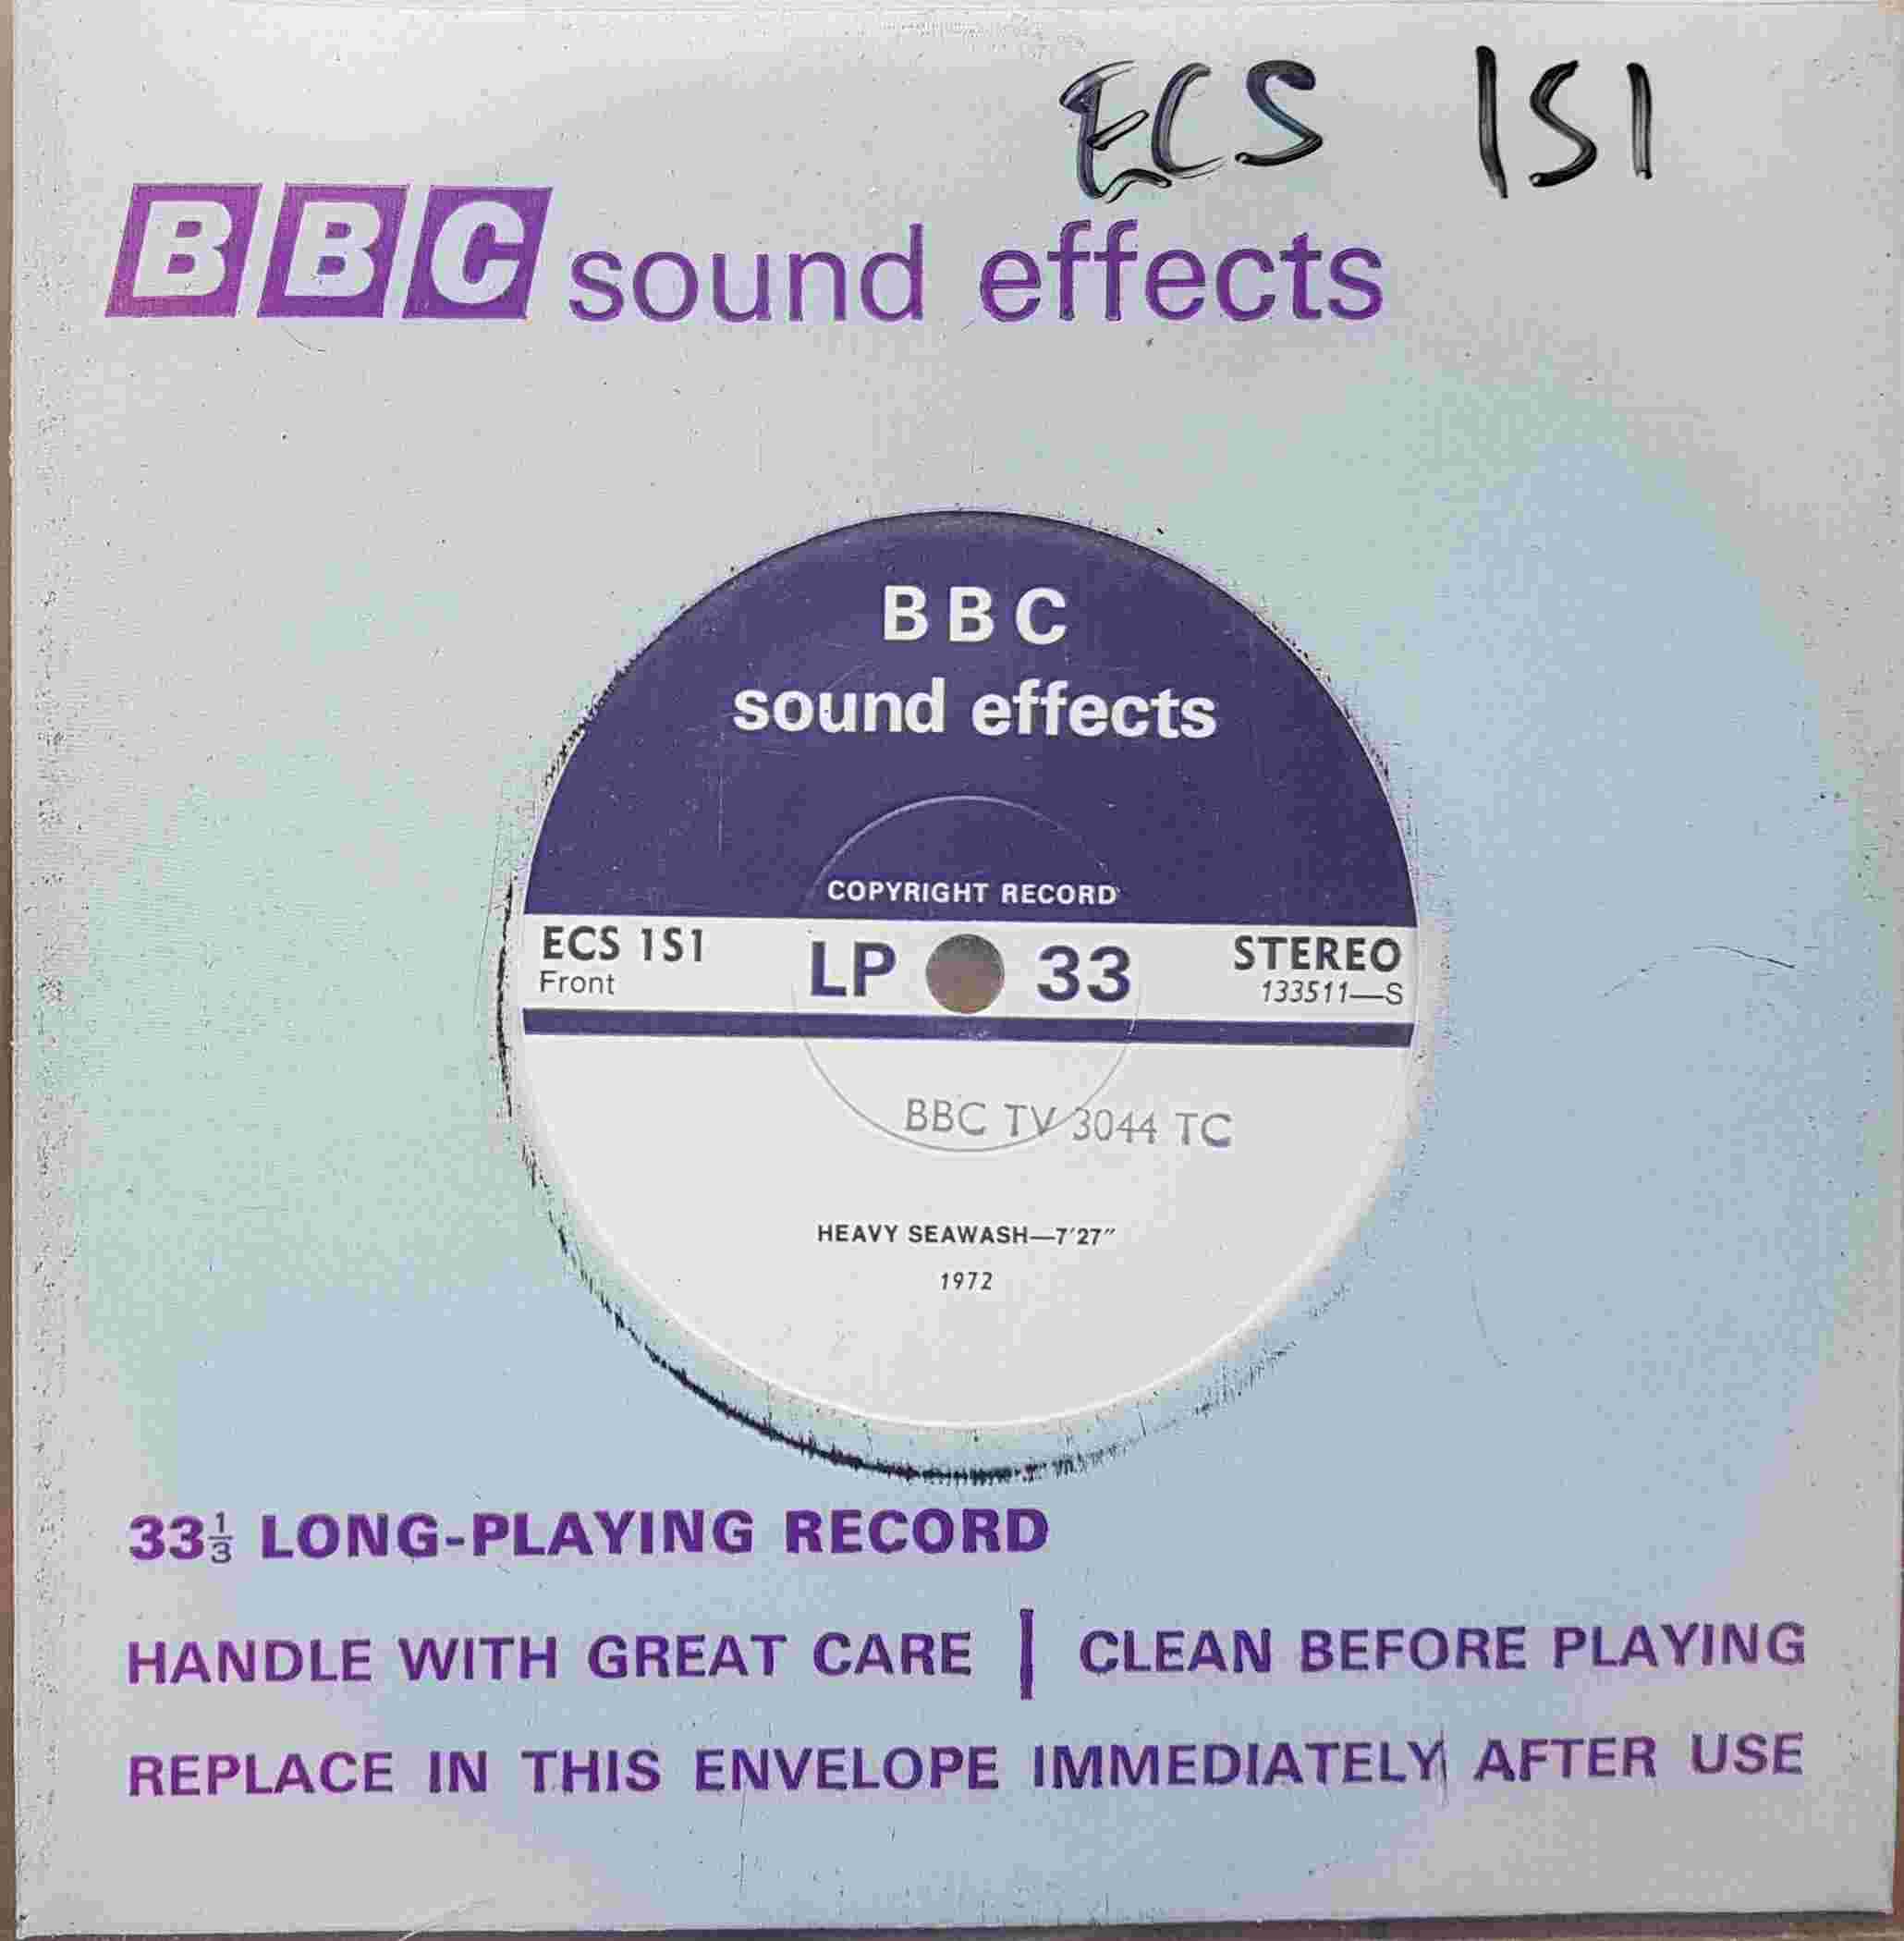 Picture of ECS 1S1 Seawash by artist Not registered from the BBC singles - Records and Tapes library